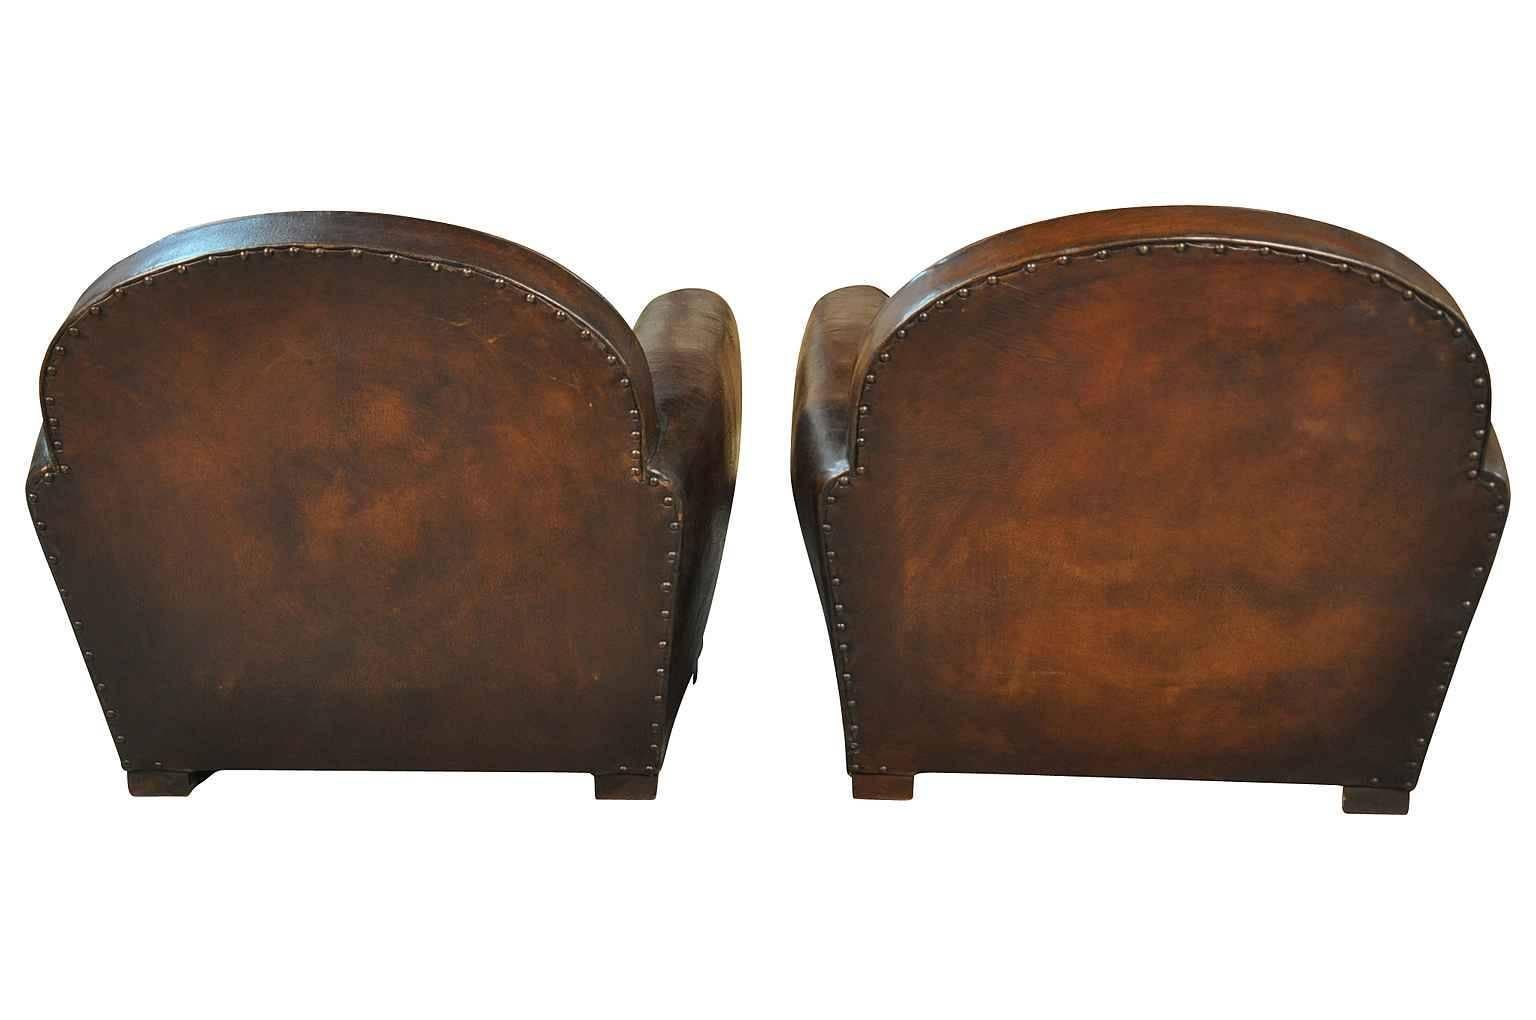 20th Century Sensational Pair of French Art Deco Leather Club Chairs